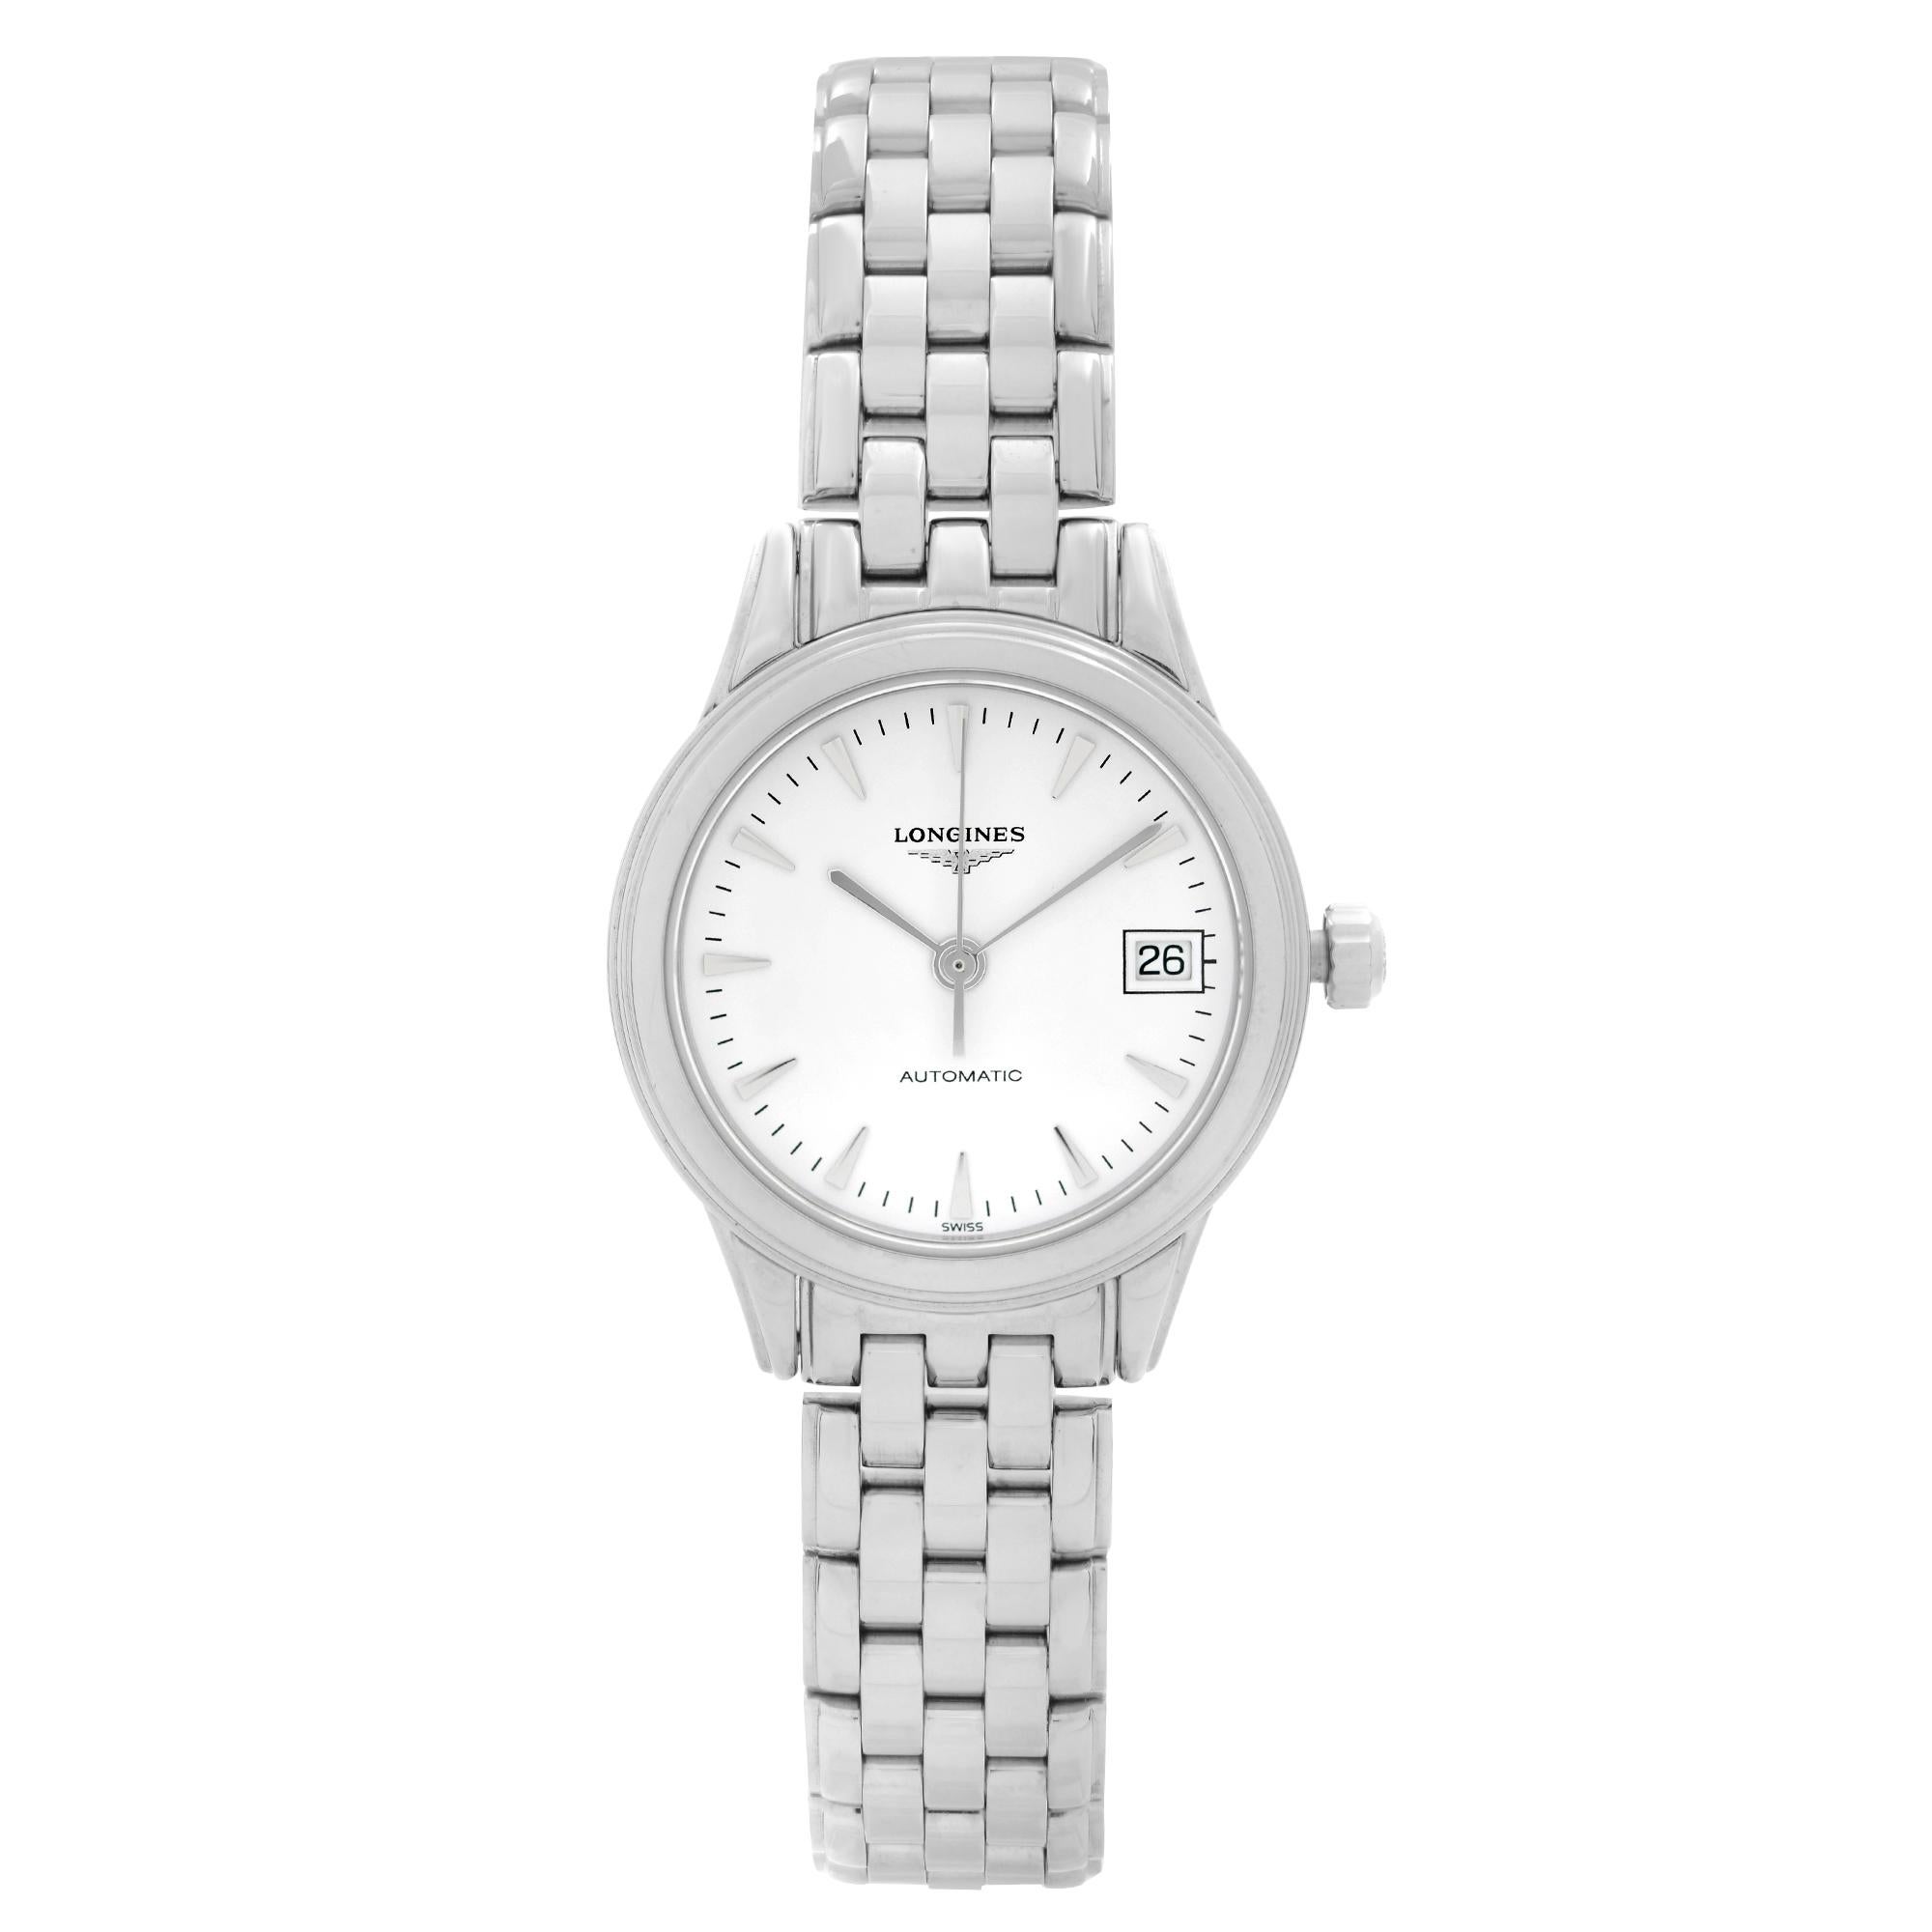 Display Model Longines Flagship 26mm Date Stainless Steel White Dial Ladies Automatic Watch L4.274.4.12.6. This Beautiful Timepiece is Powered by Mechanical (Automatic) Movement And Features: Round Stainless Steel Case & Bracelet Fixed Stainless